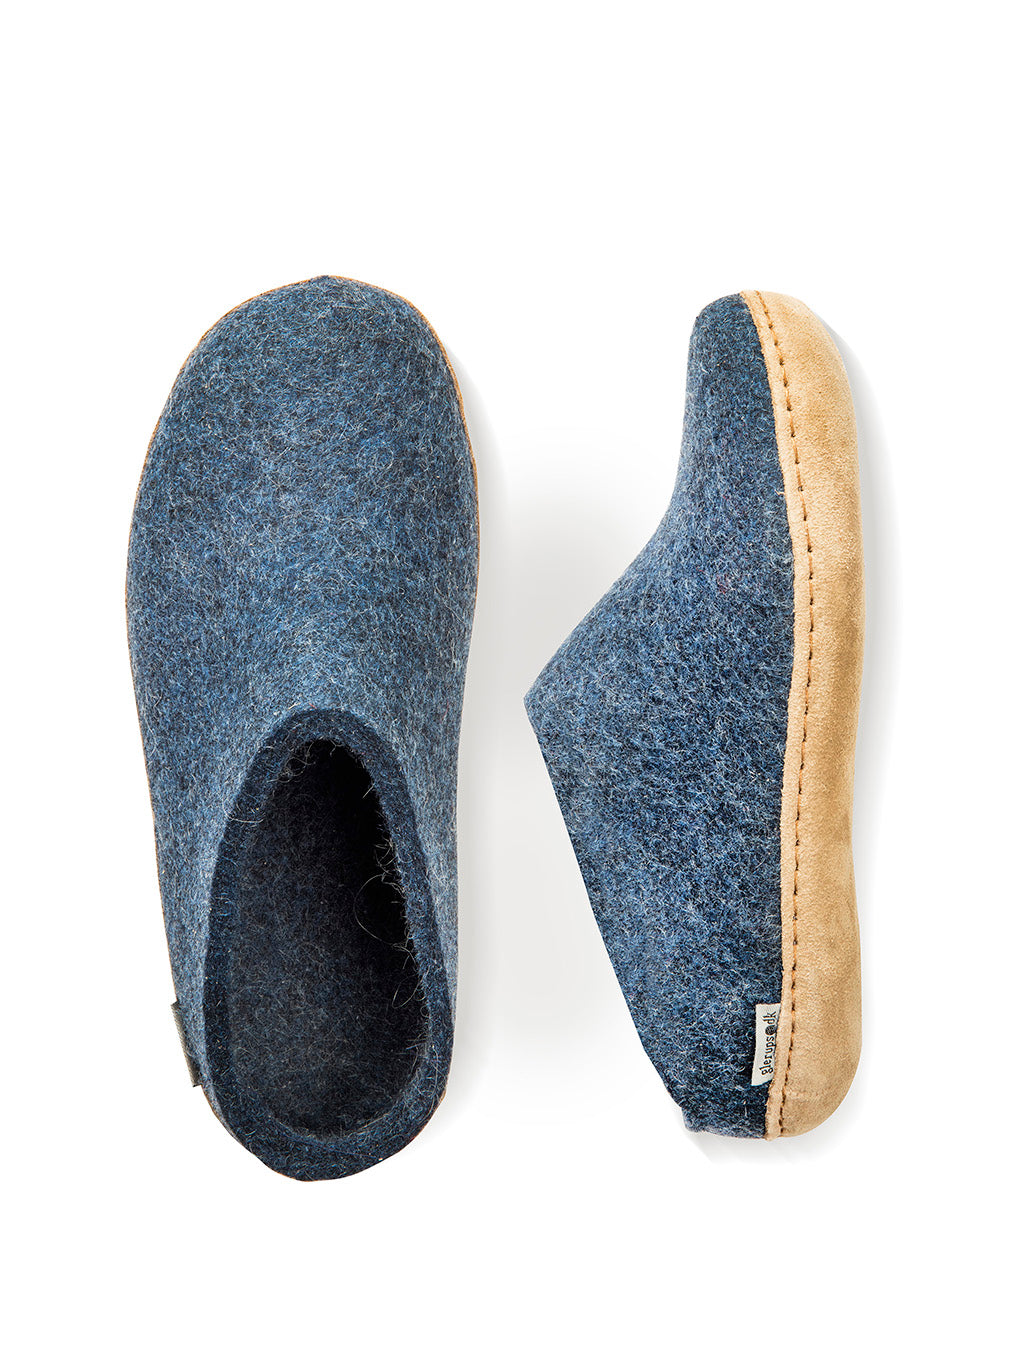 Blue-denim wool slipper with leather sole